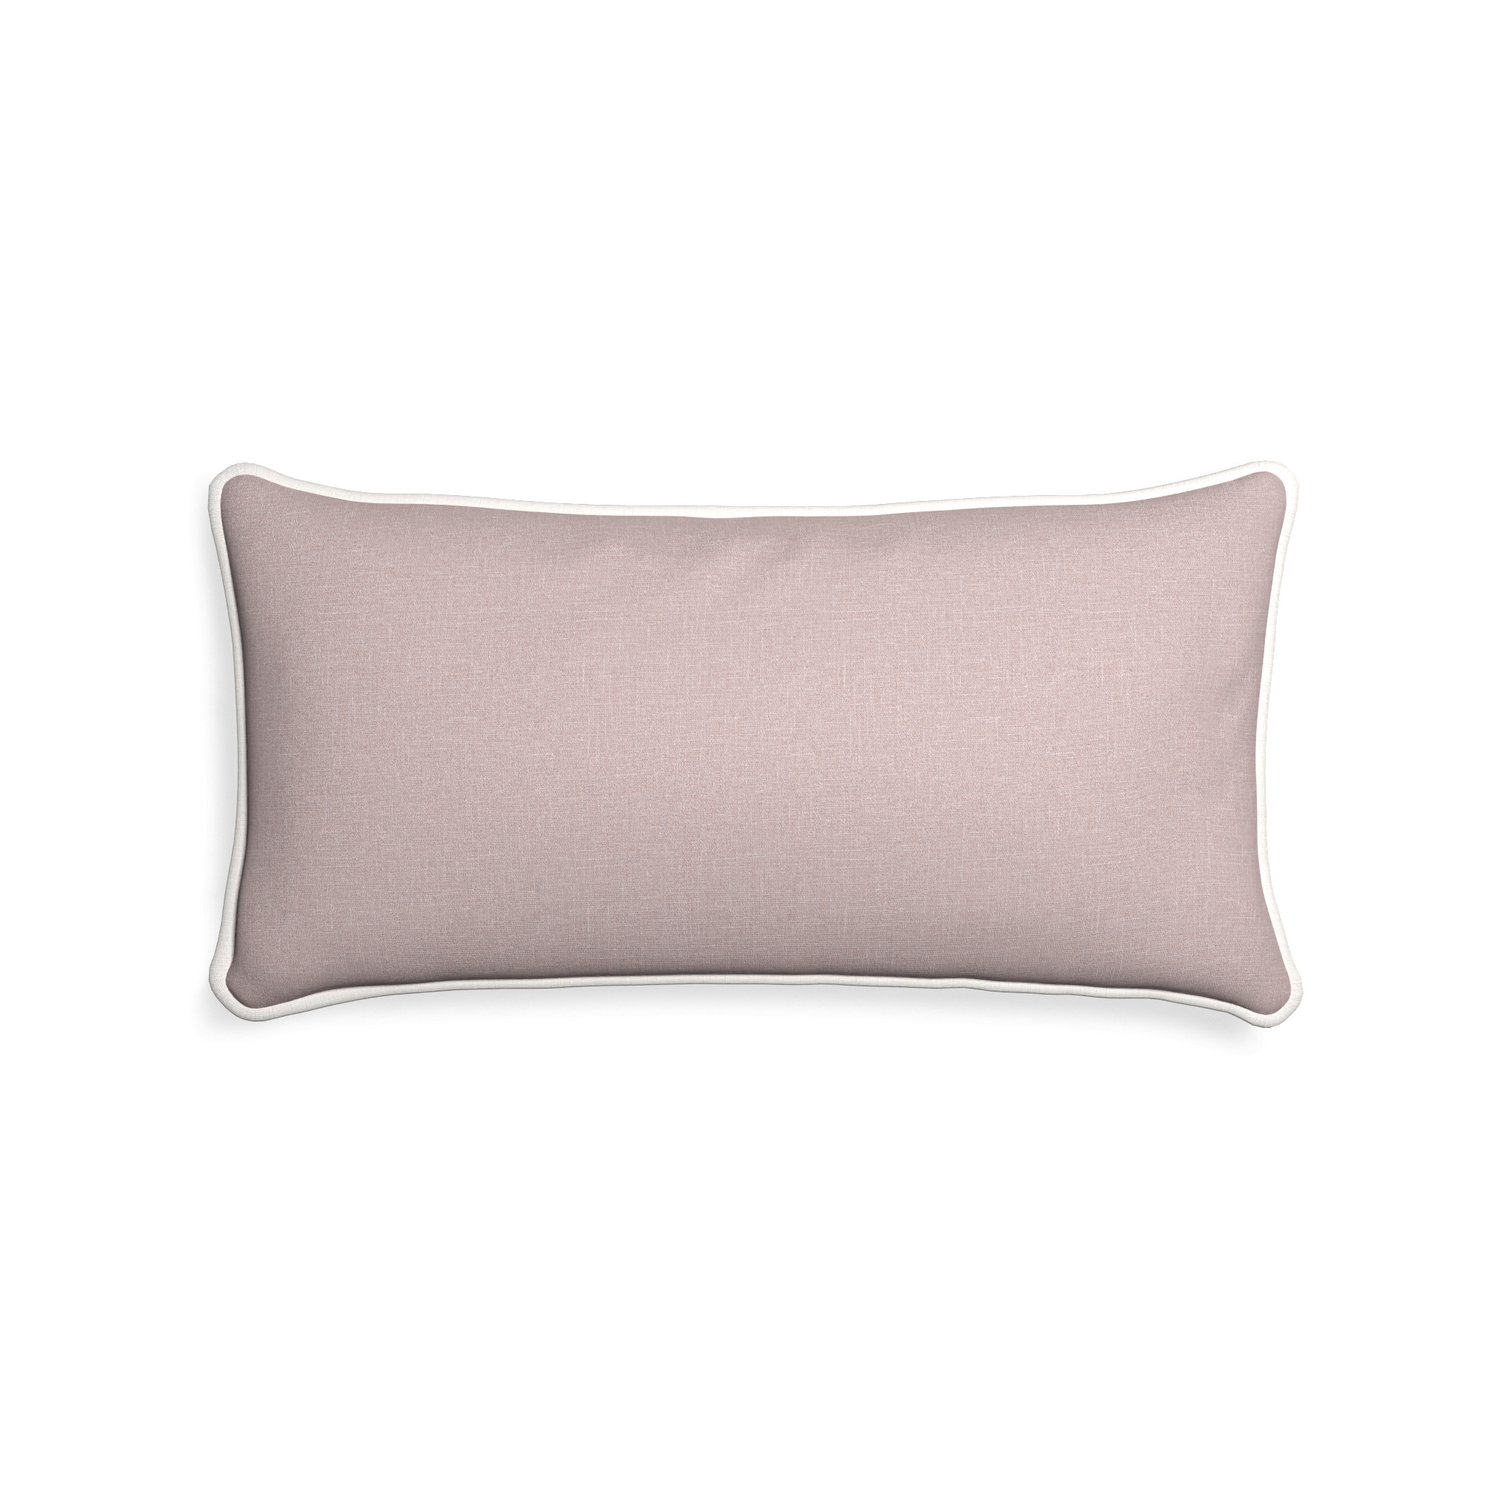 Midi-lumbar orchid custom mauve pinkpillow with snow piping on white background